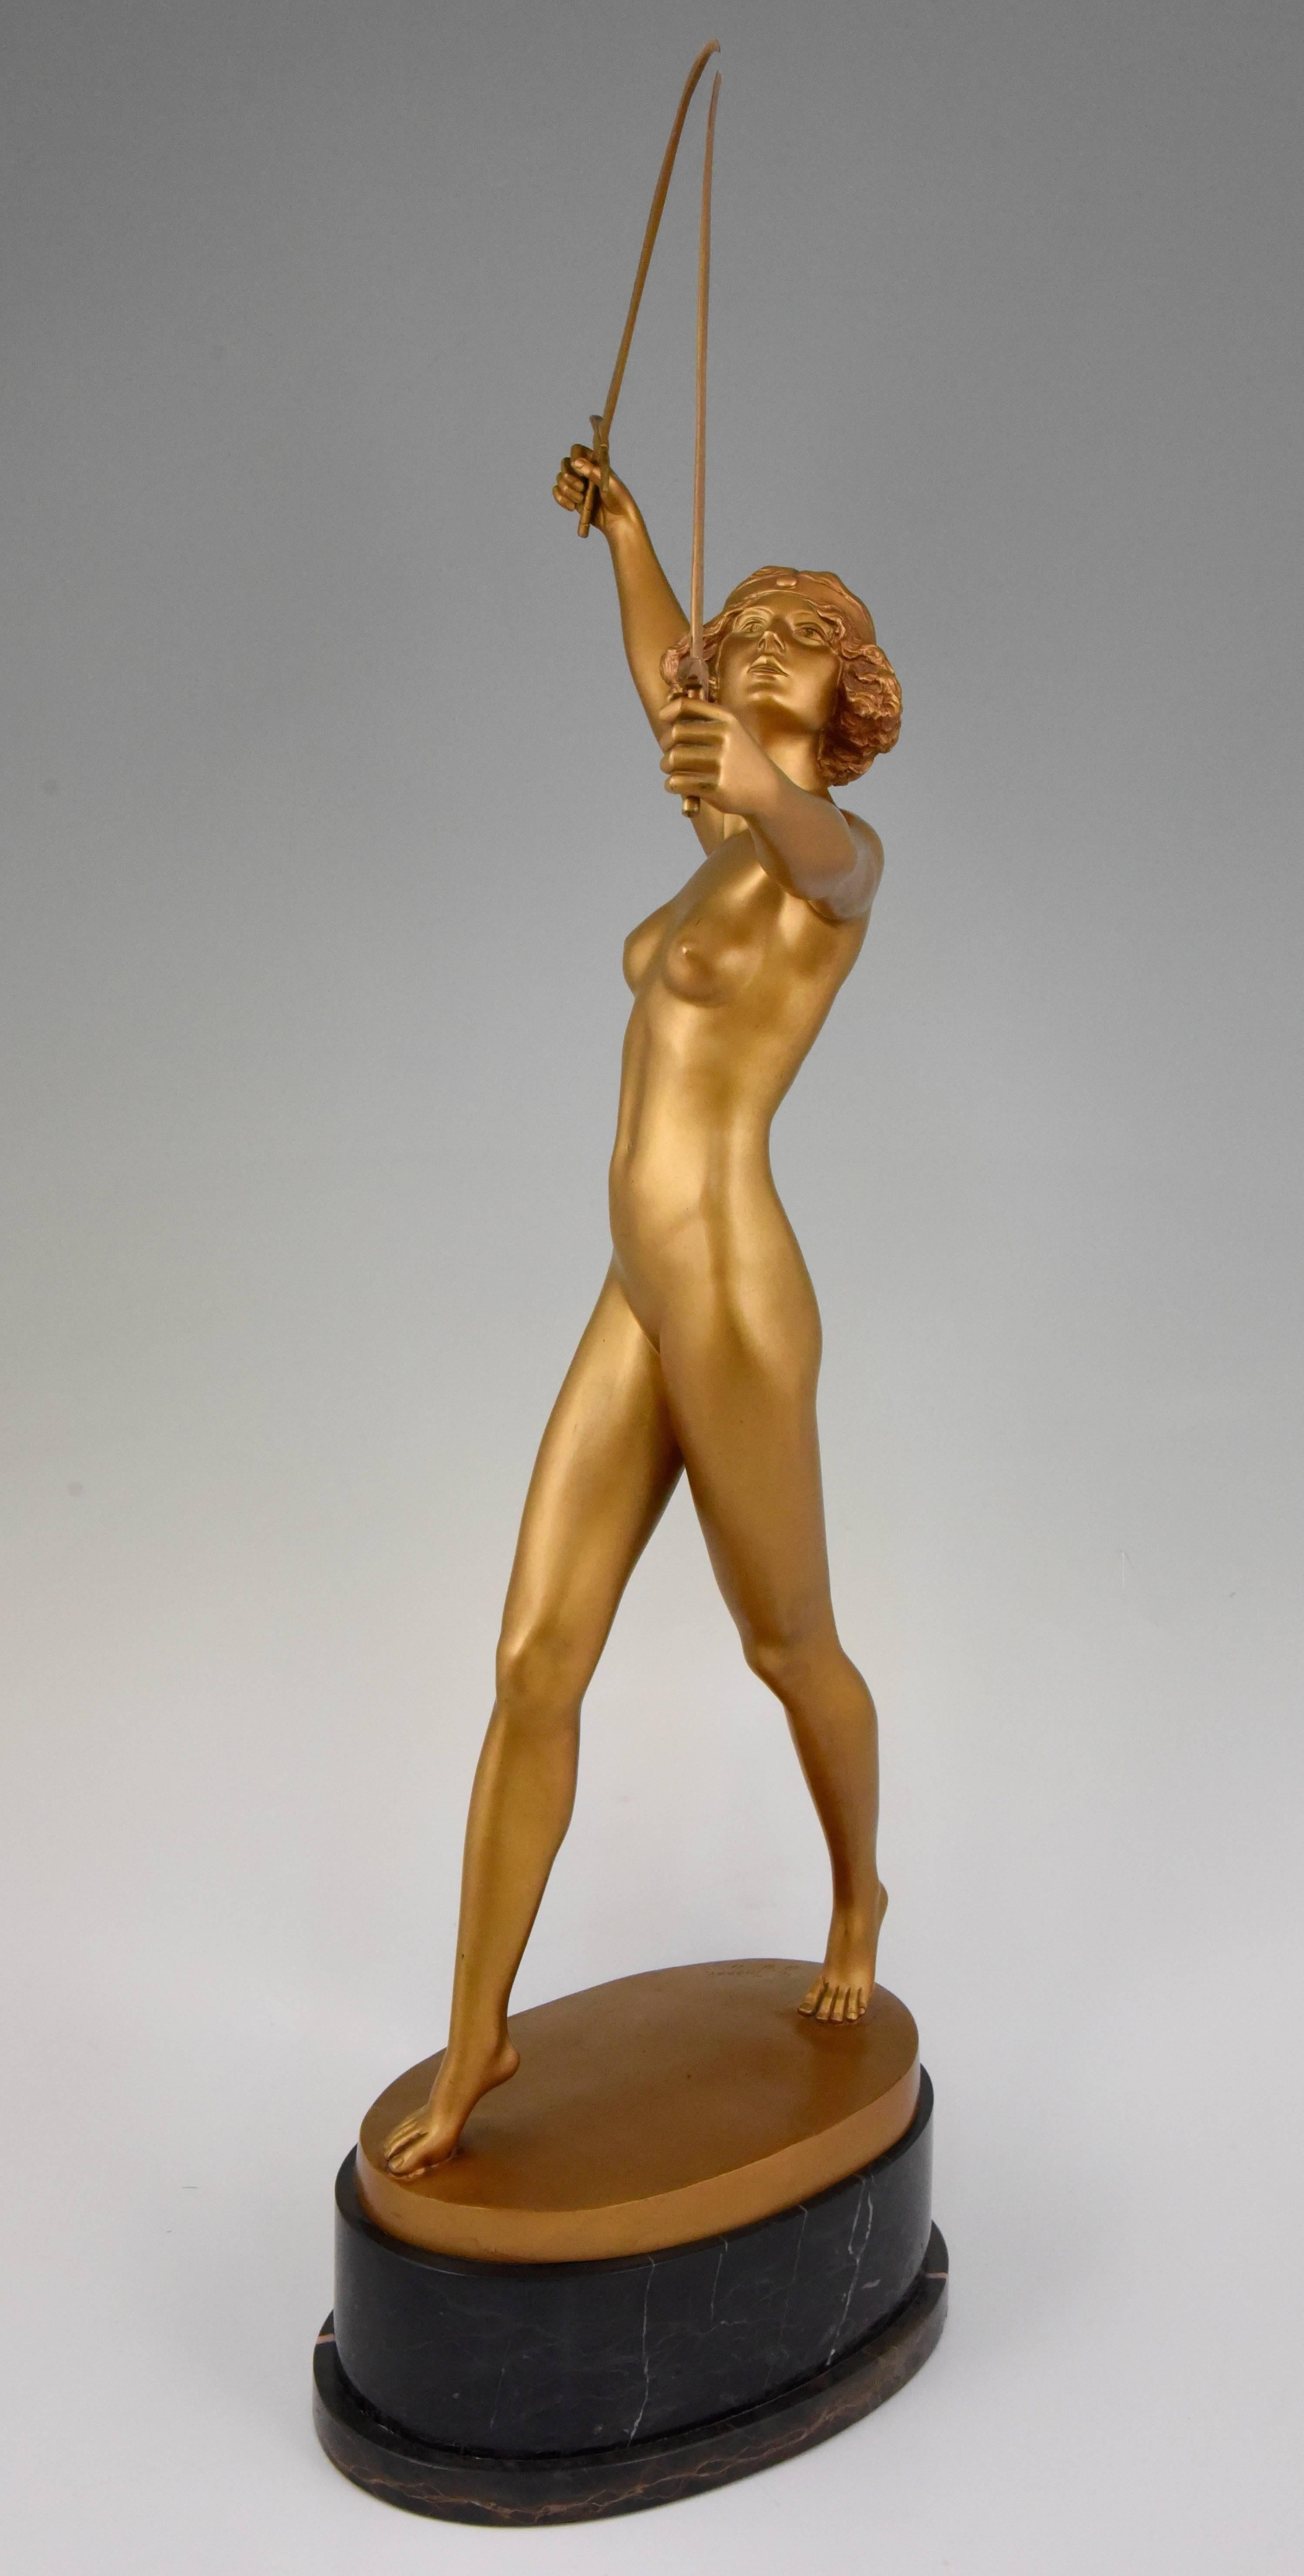 German Art Deco Gilt Bronze Sculpture of a Nude with Two Swords by Gotthilf Jaeger